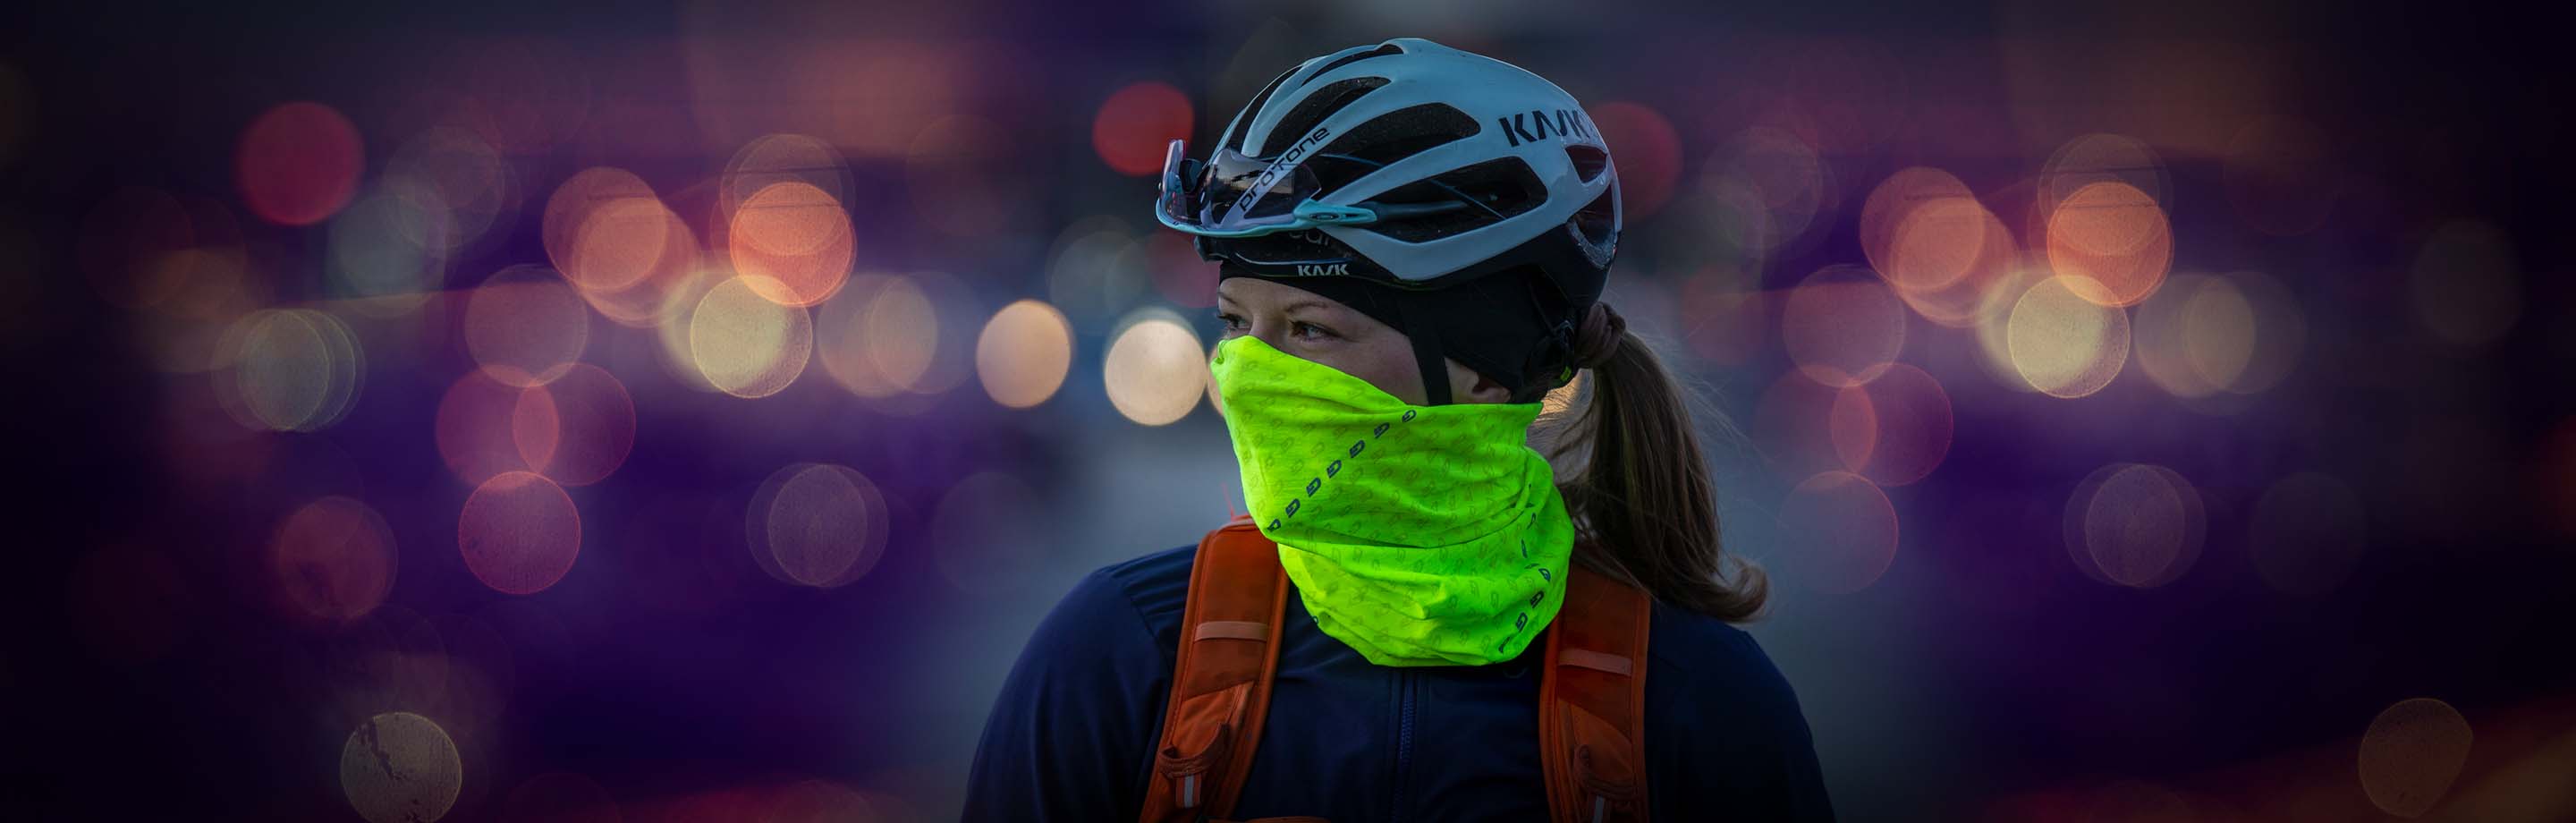 Hi-Vis – Reflective Cycling Clothing, Lights & Accessories for Illuminating Visibility and Maximum Safety